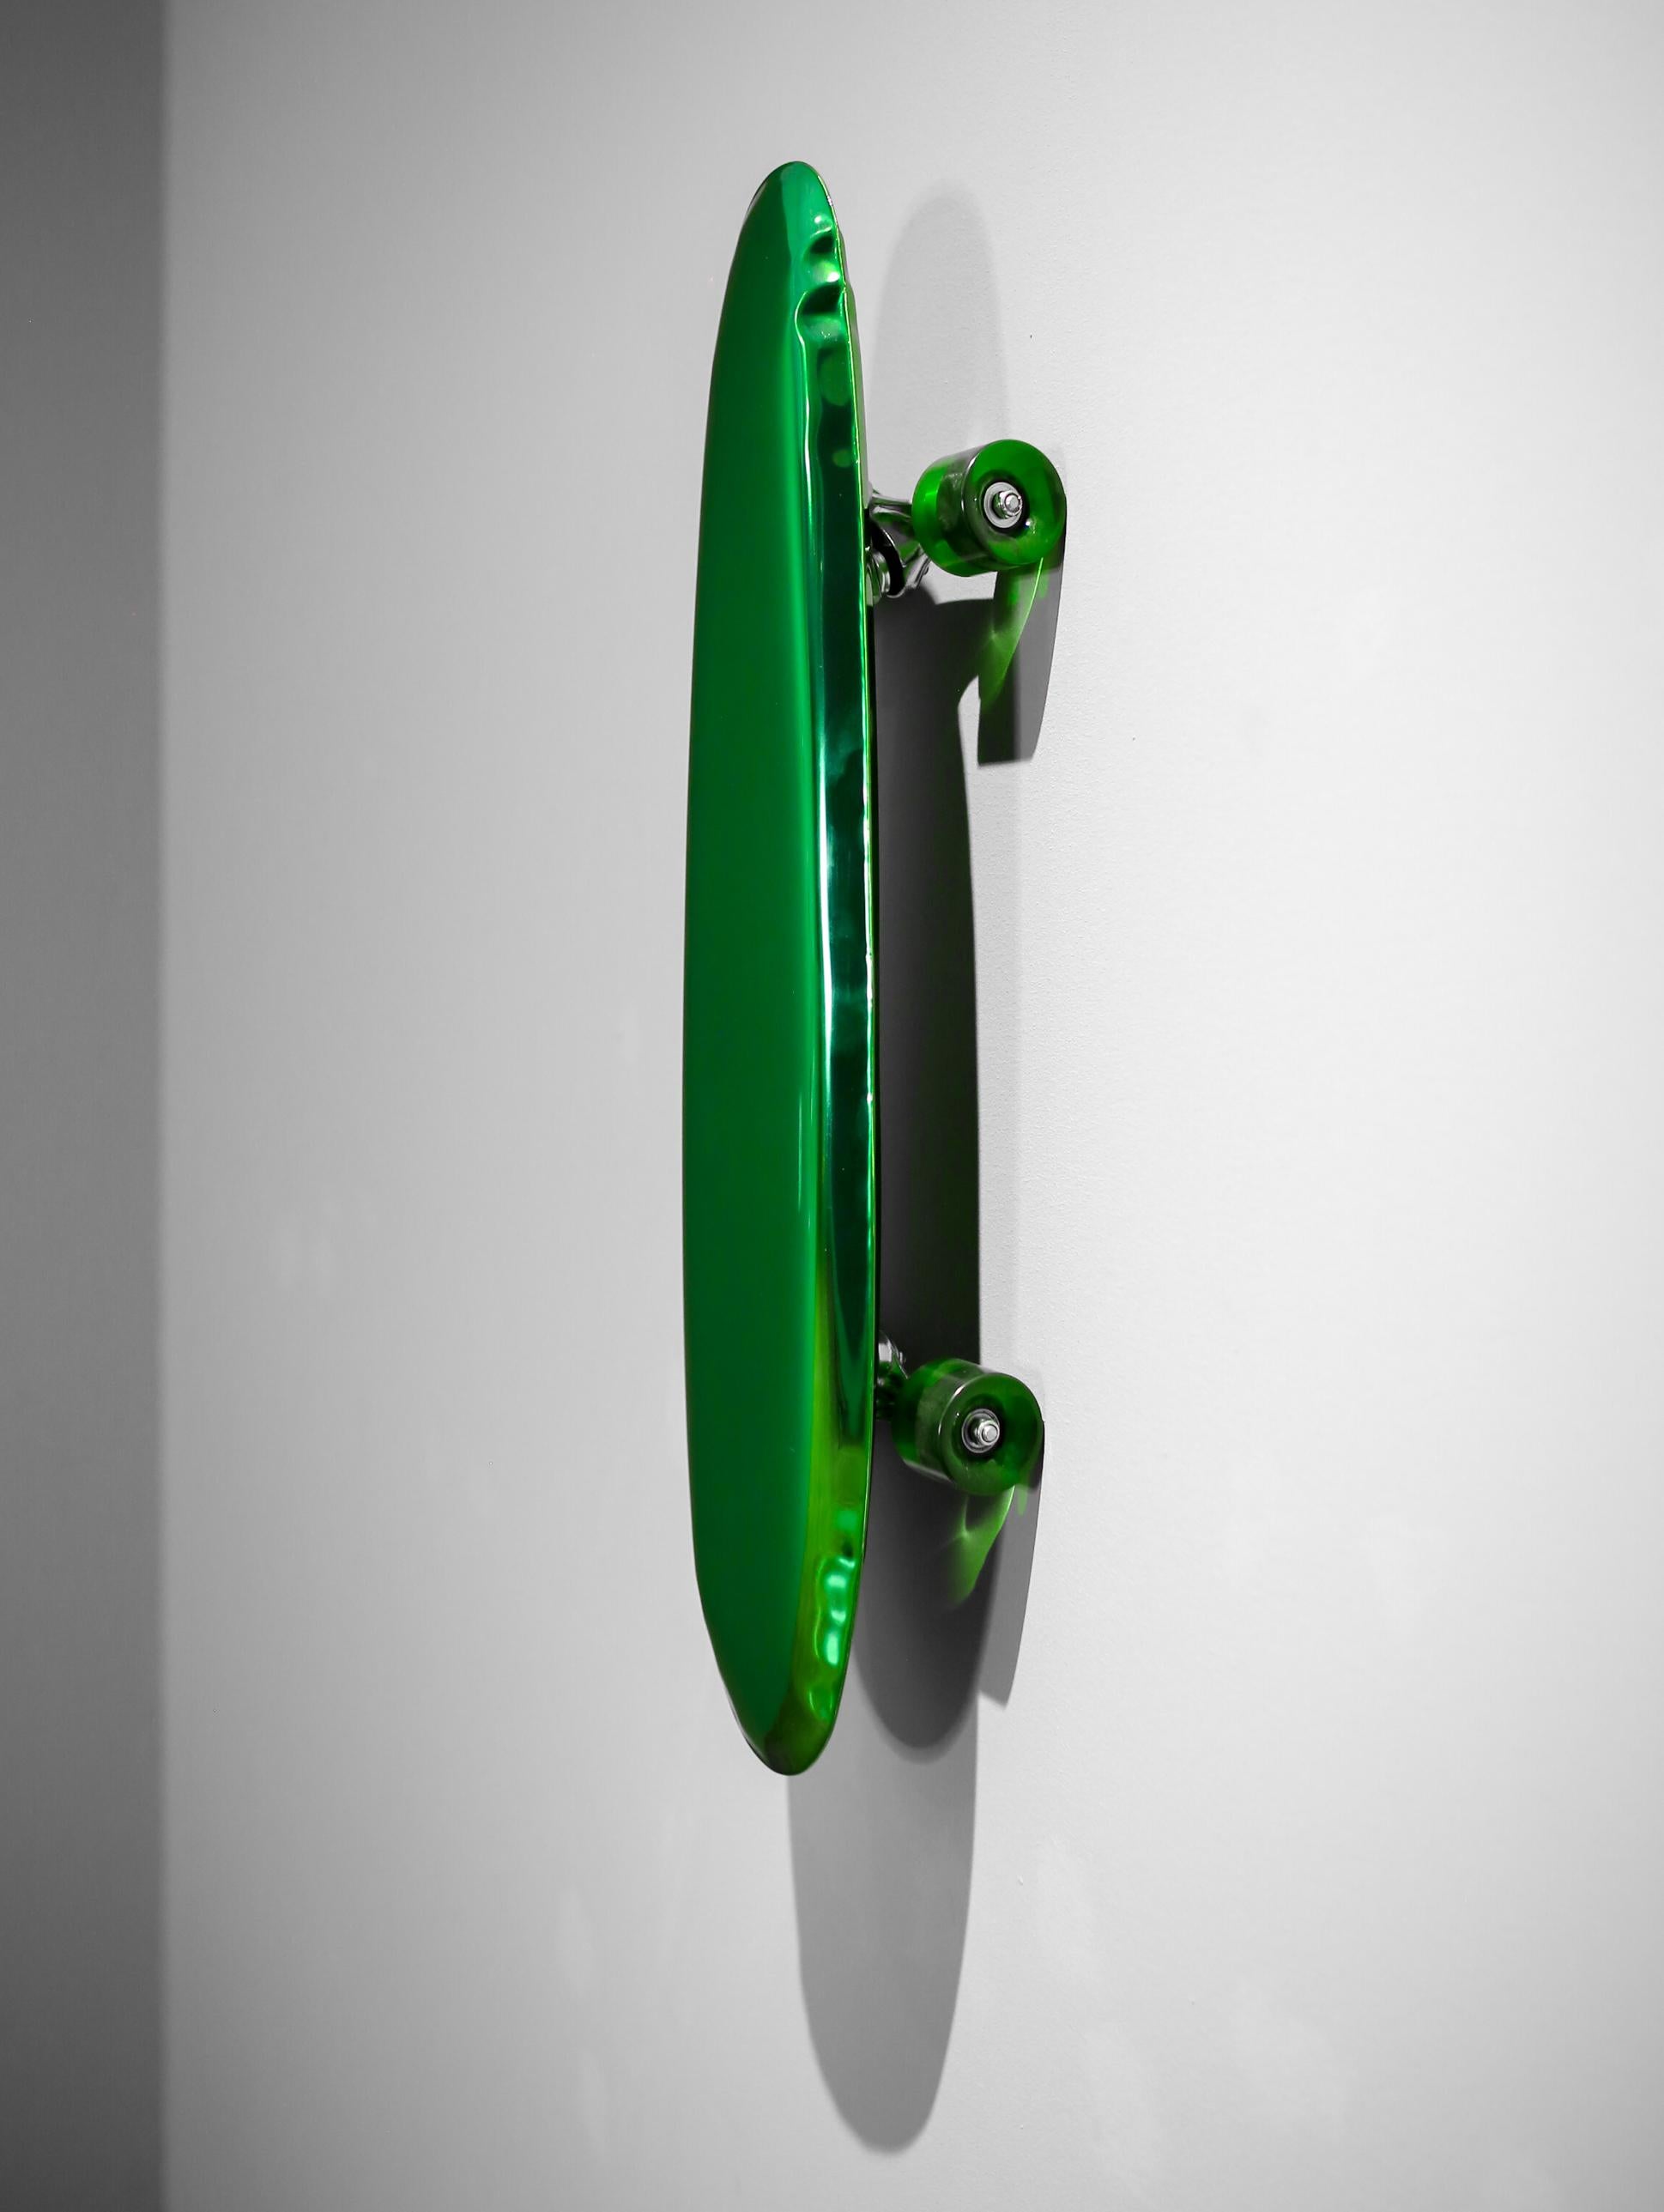 Organic Modern 'Bolid' Green Skateboard by Zieta, Collectible Object For Sale